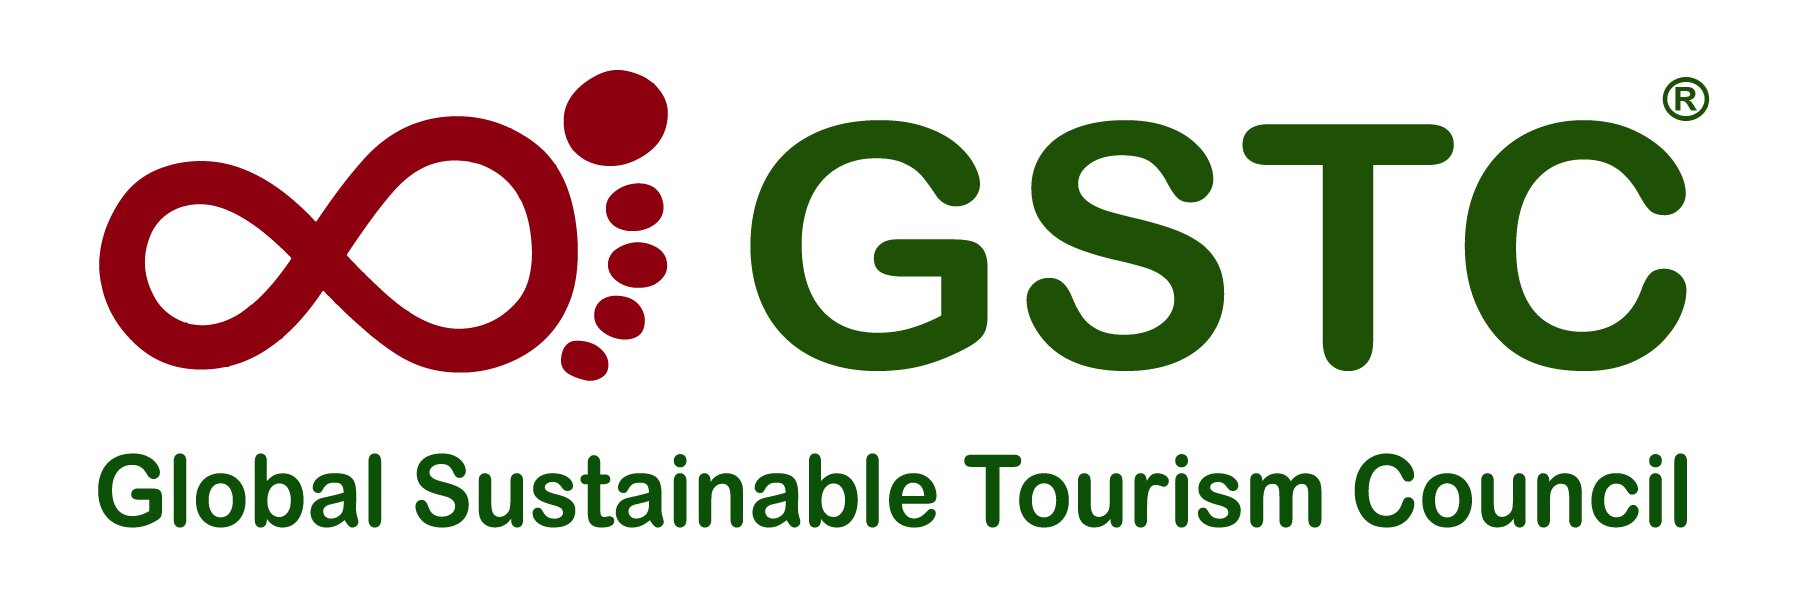 Global Sustainable Tourism Council (GSTC)